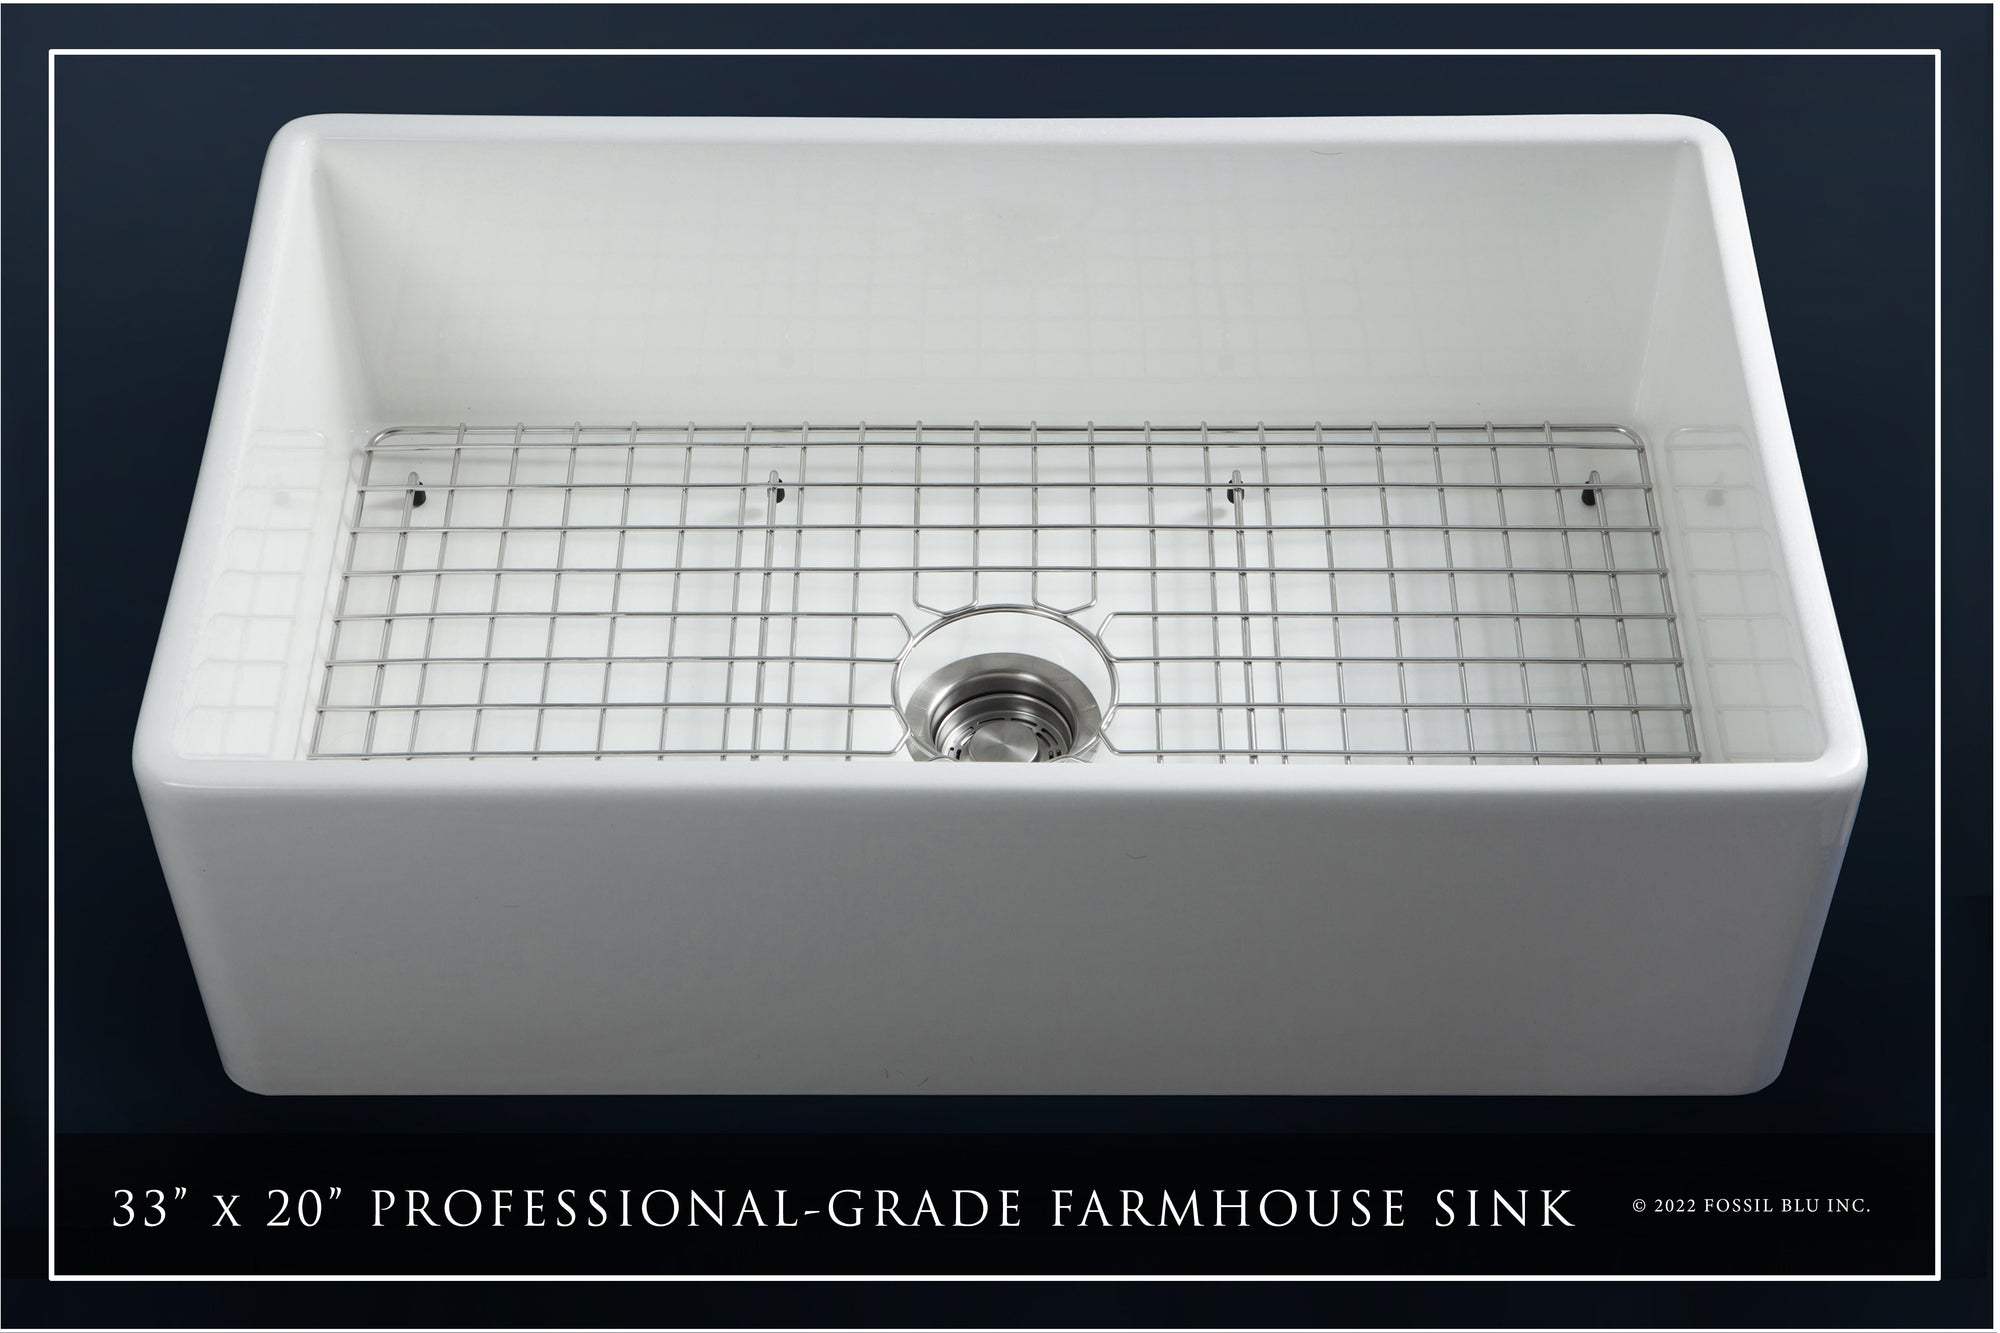 FSW1002 LUXURY 33-INCH SOLID FIRECLAY FARMHOUSE SINK IN WHITE, STAINLESS STEEL ACCS, FLAT FRONT